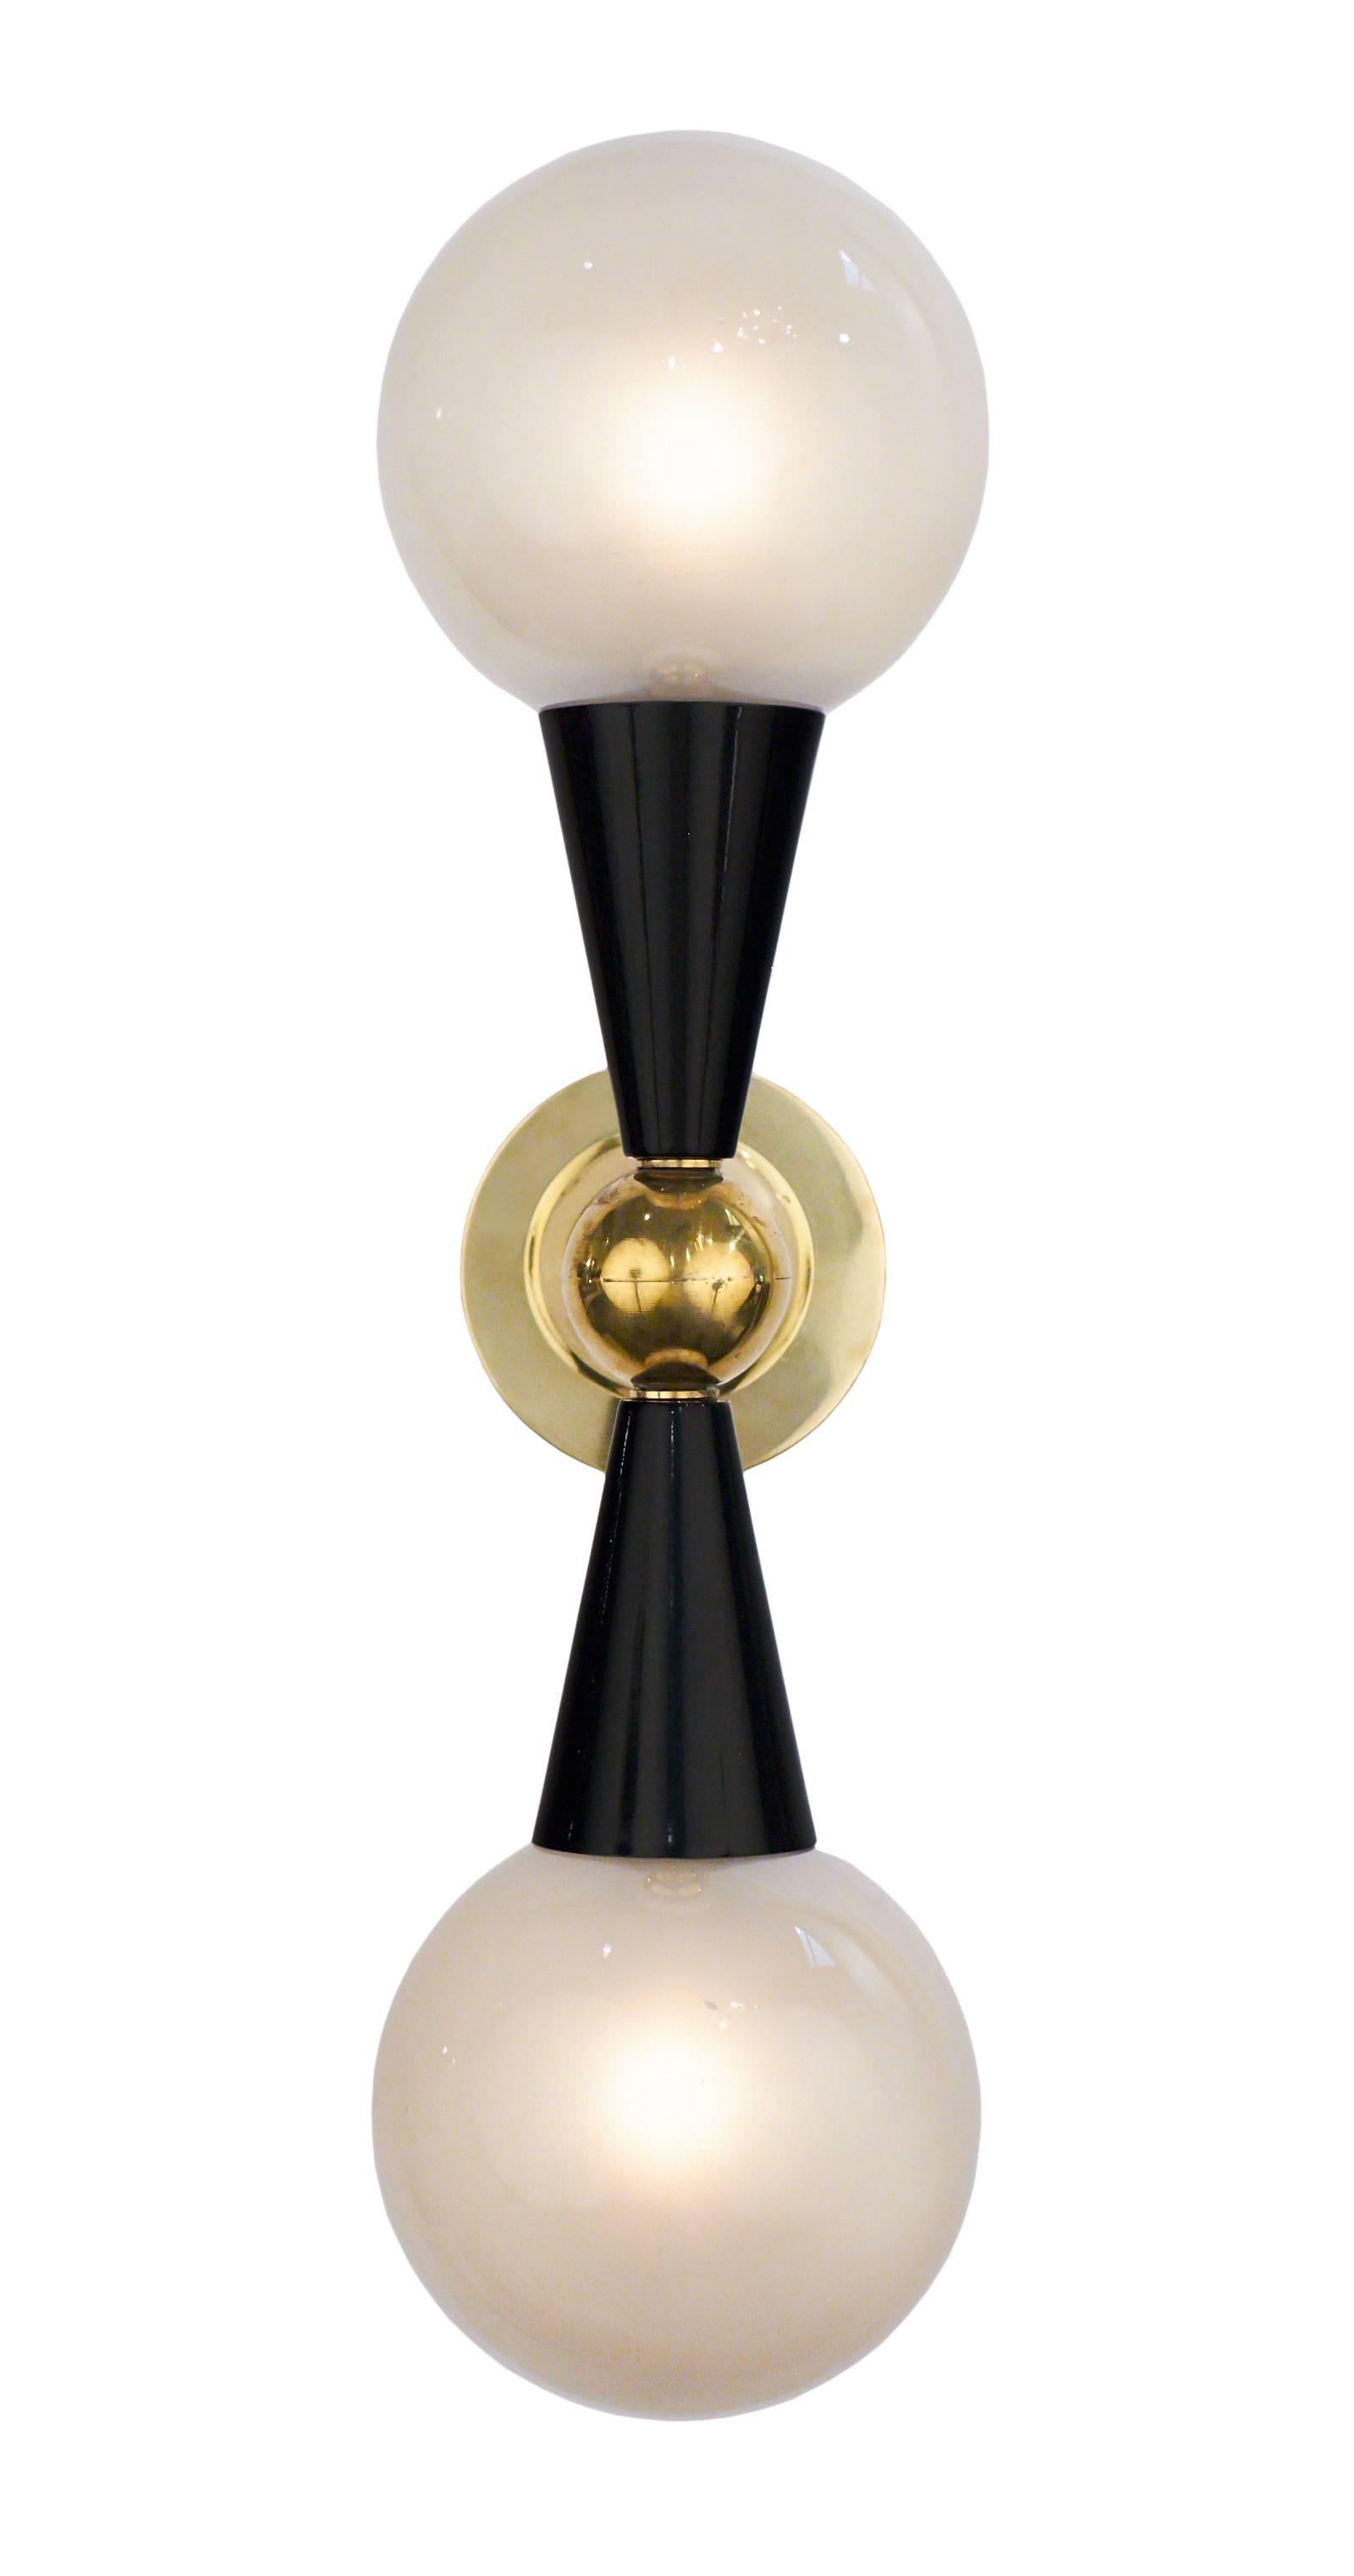 Murano glass globe shades and black lacquered cones extend from a brass structure on each of these Italian Mid-Century Modern style sconces. A matching chandelier is also available. In the manner of Stilnovo. Wired to fit US standards.